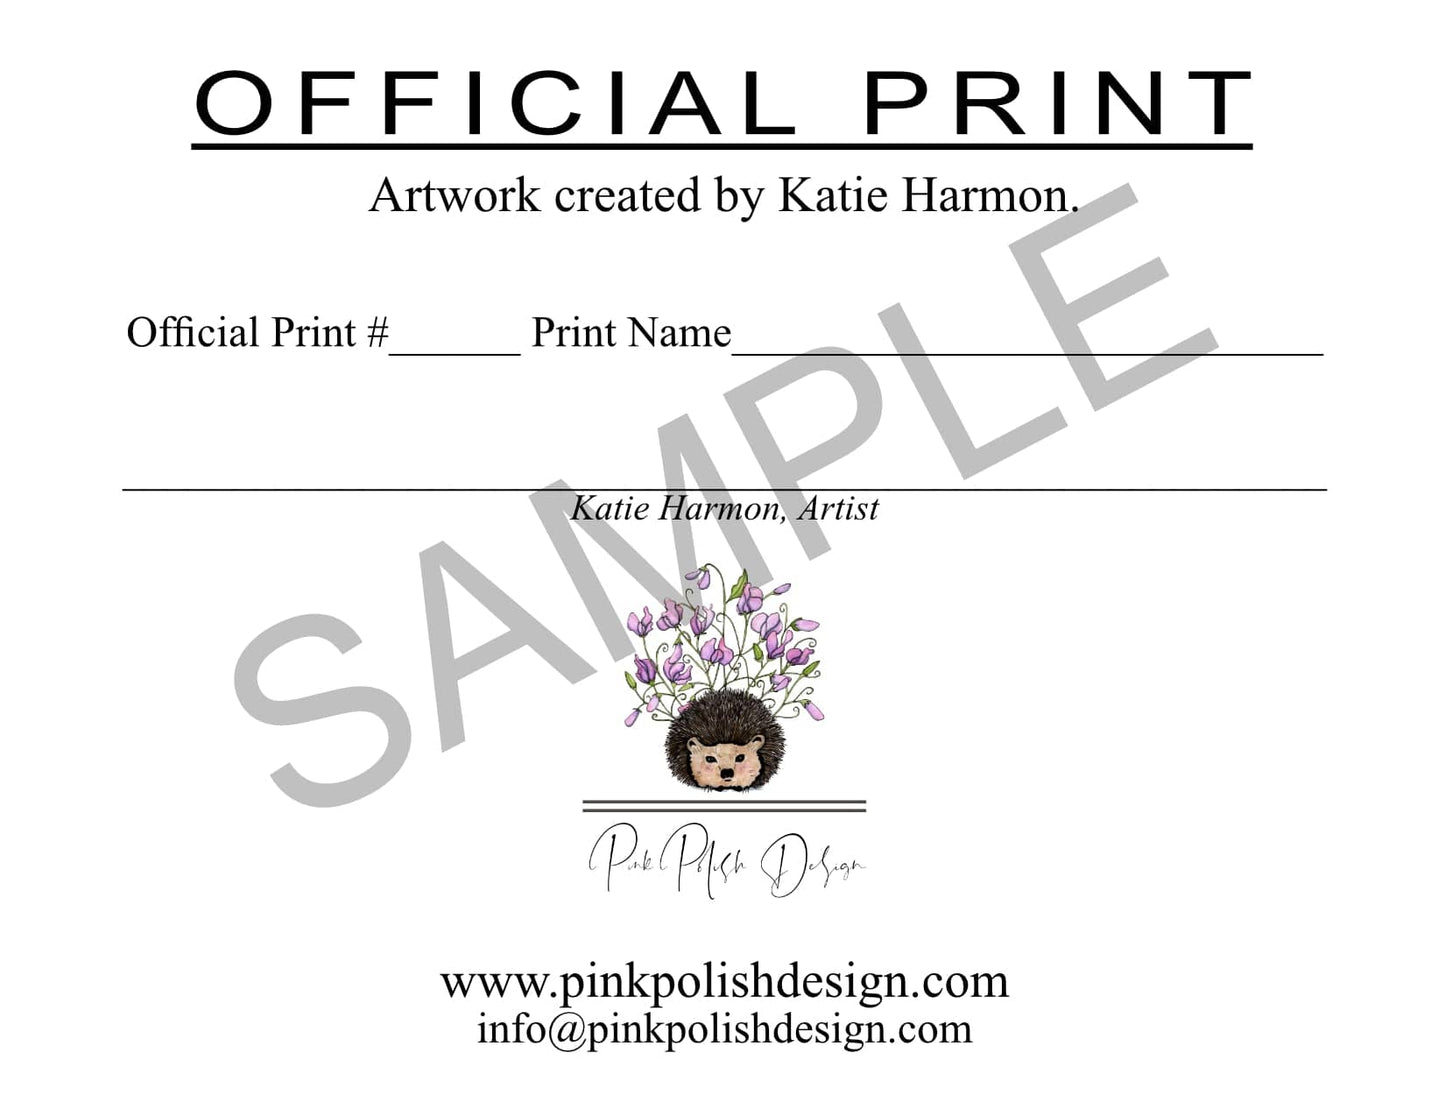 PinkPolish Design Art Prints "Pinky Promise" Limited Edition Embellished Numbered Print: Art Print